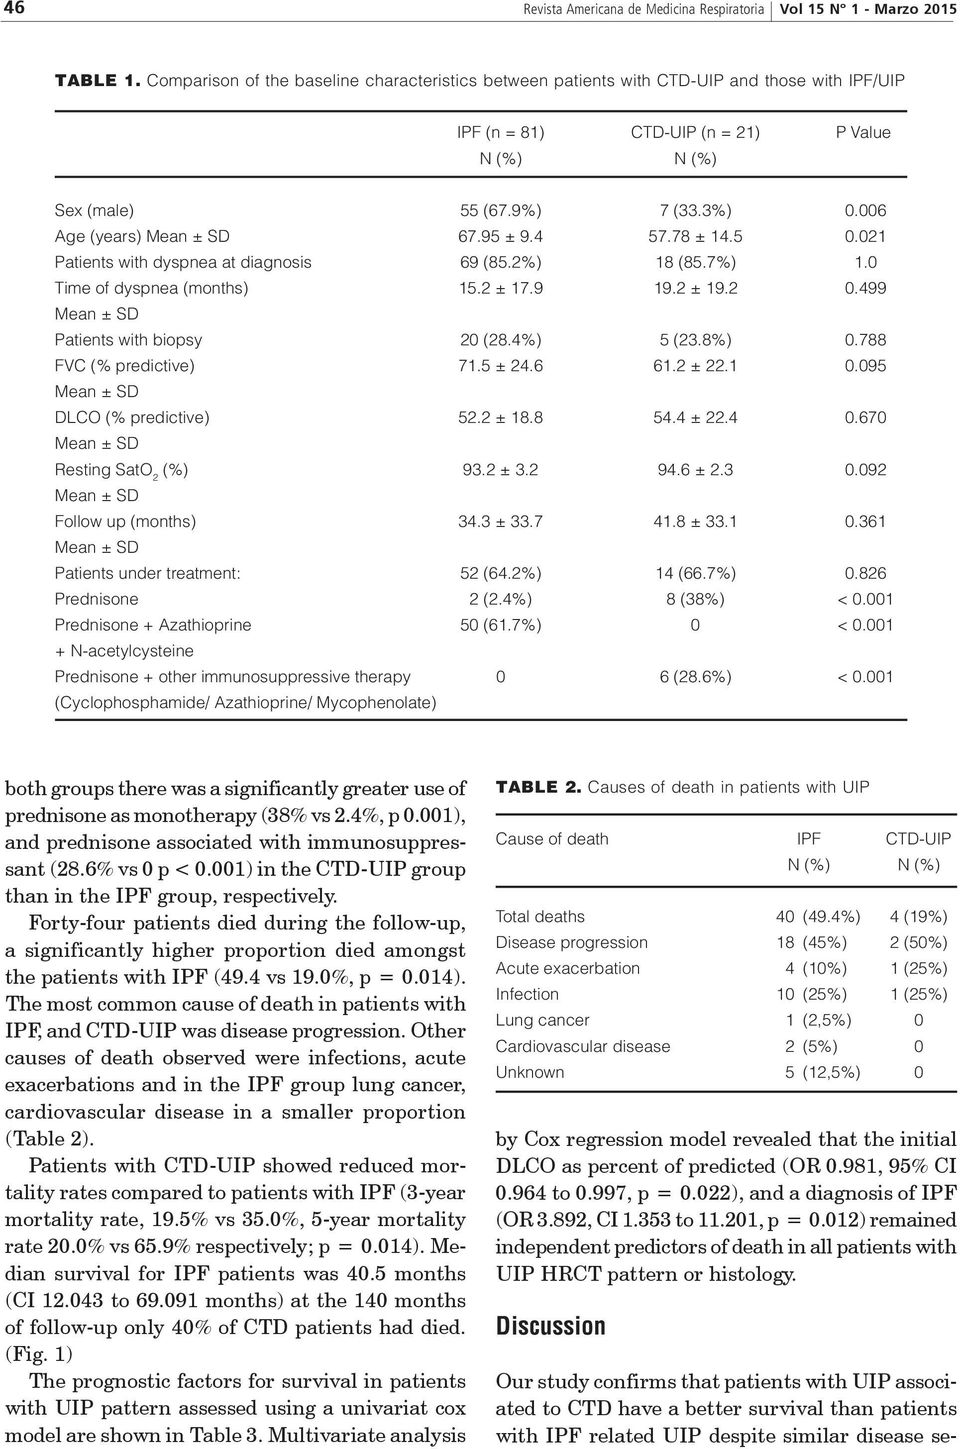 006 Age (years) Mean ± SD 67.95 ± 9.4 57.78 ± 14.5 0.021 Patients with dyspnea at diagnosis 69 (85.2%) 18 (85.7%) 1.0 Time of dyspnea (months) 15.2 ± 17.9 19.2 ± 19.2 0.